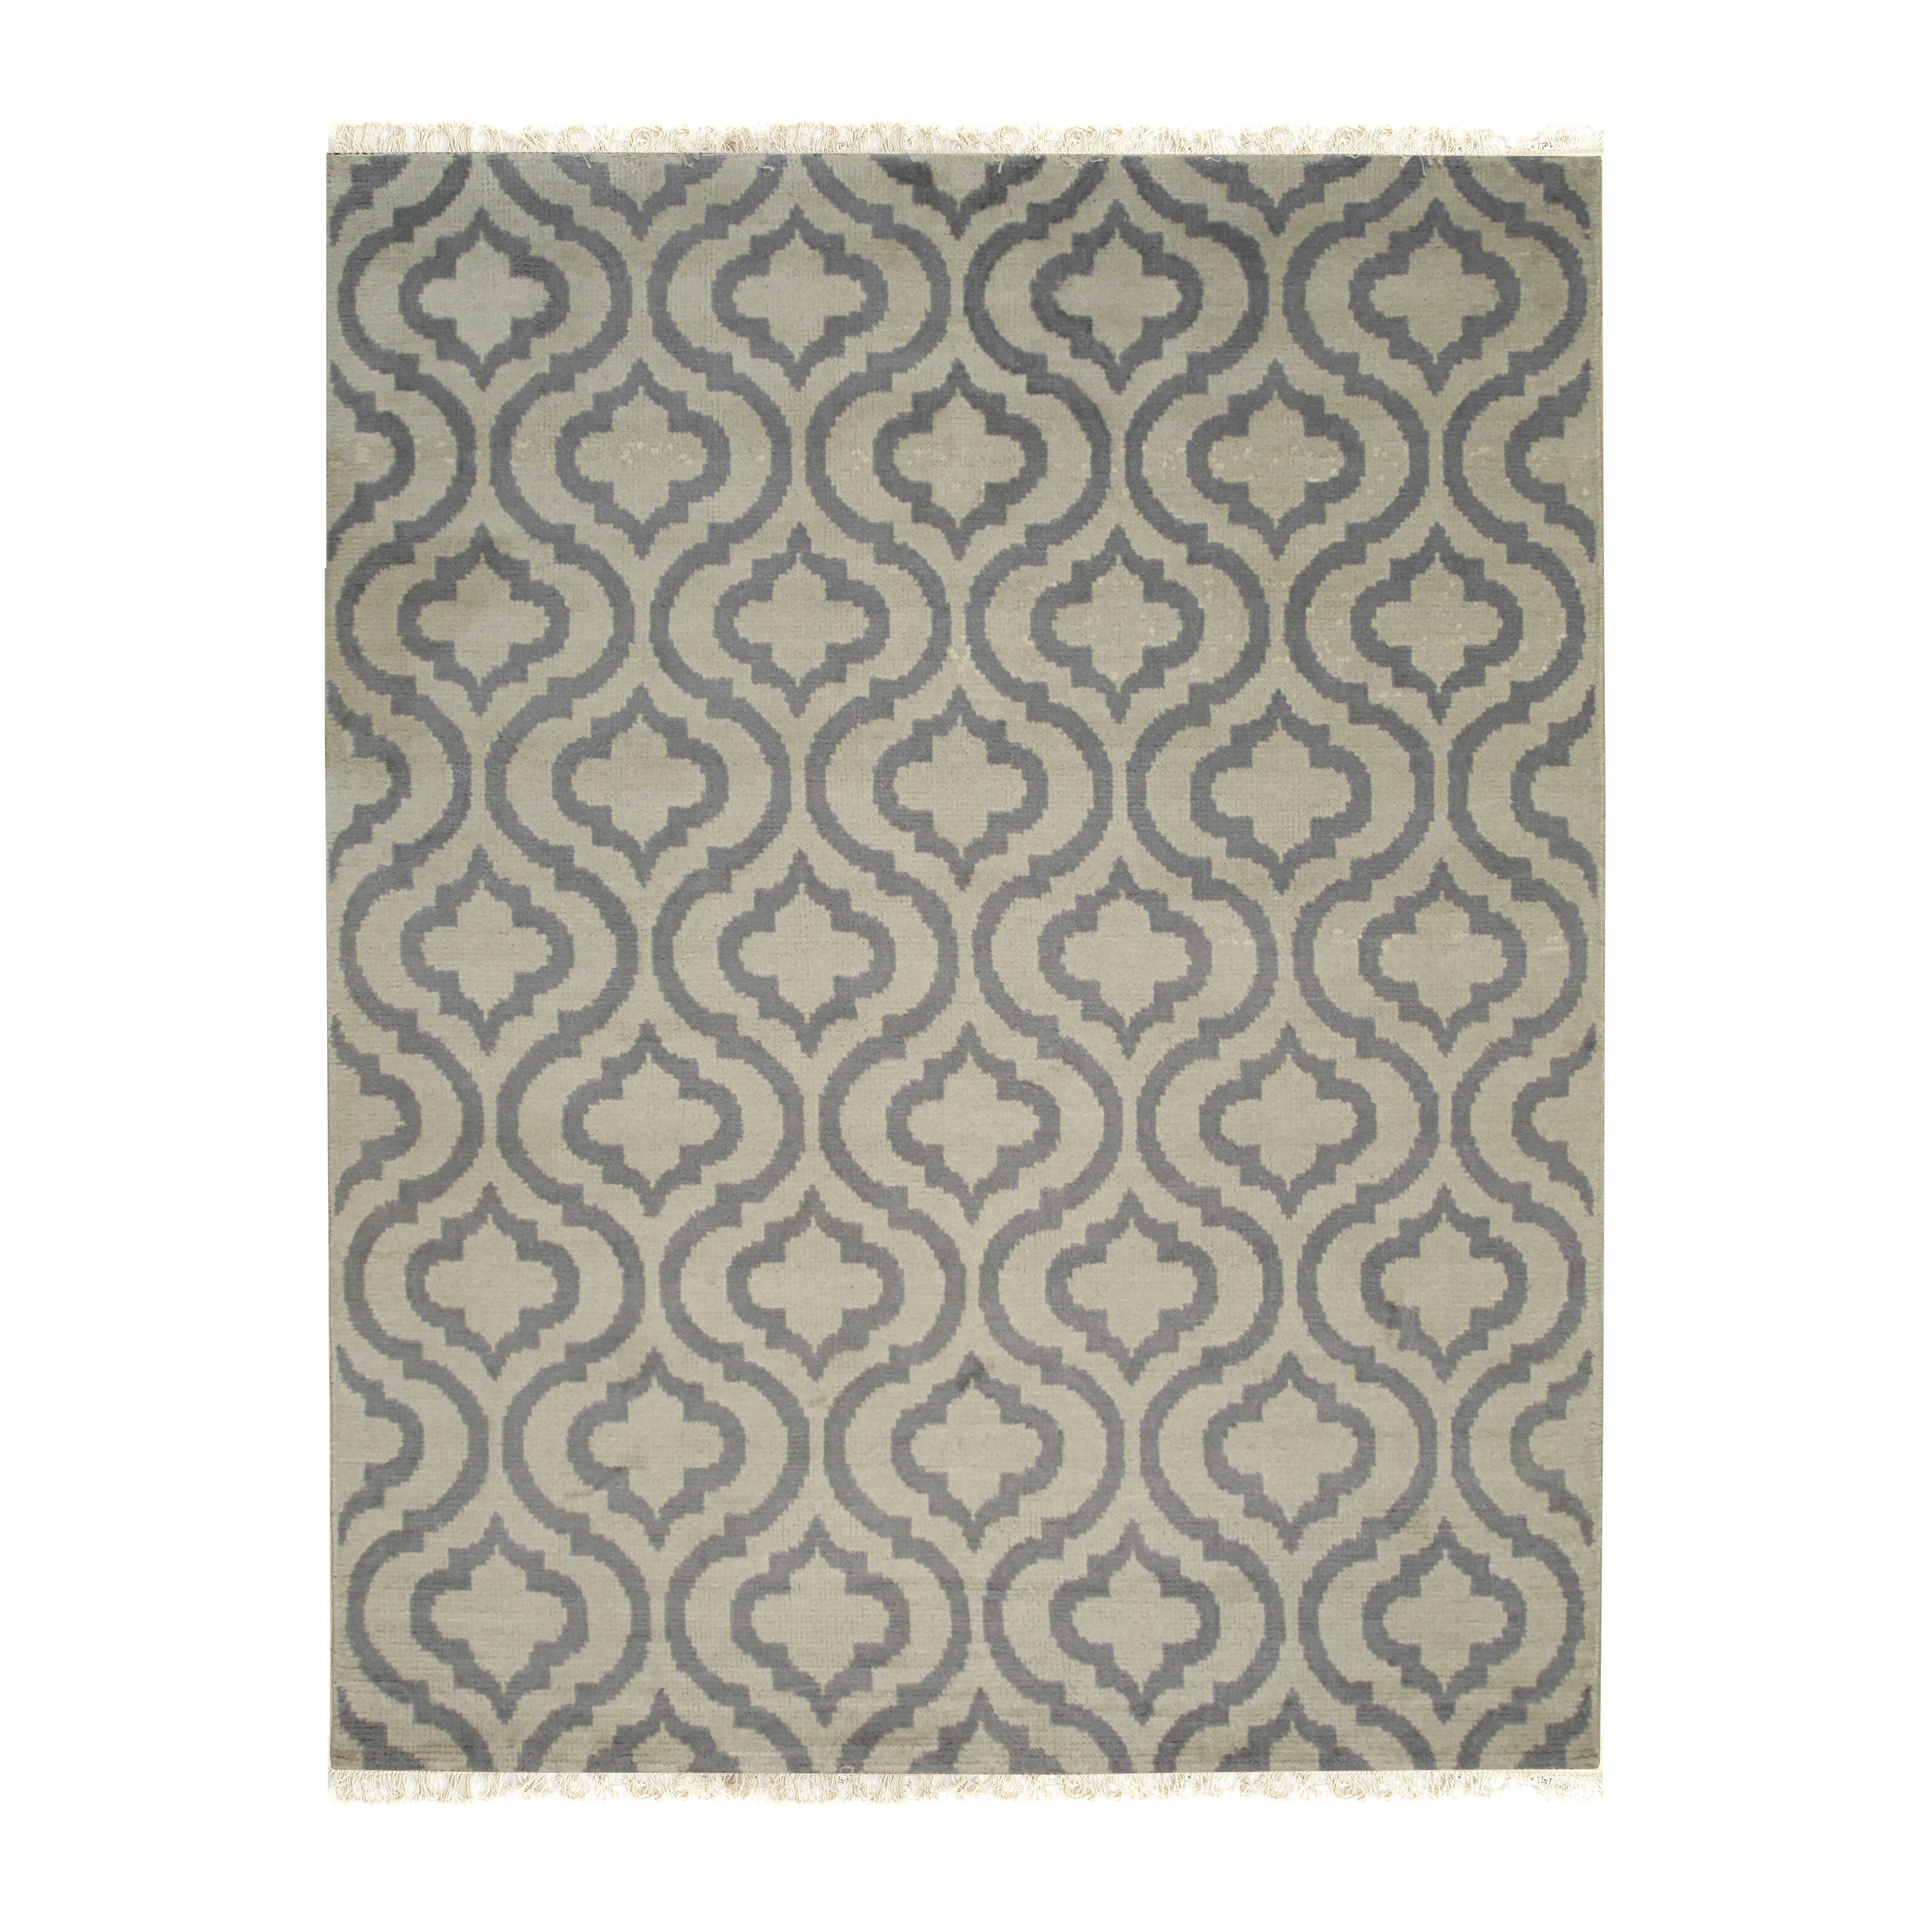 Hand-knotted Wool Grey Contemporary Trellis Moroccan Rug - 8' x 10' | Bed Bath & Beyond